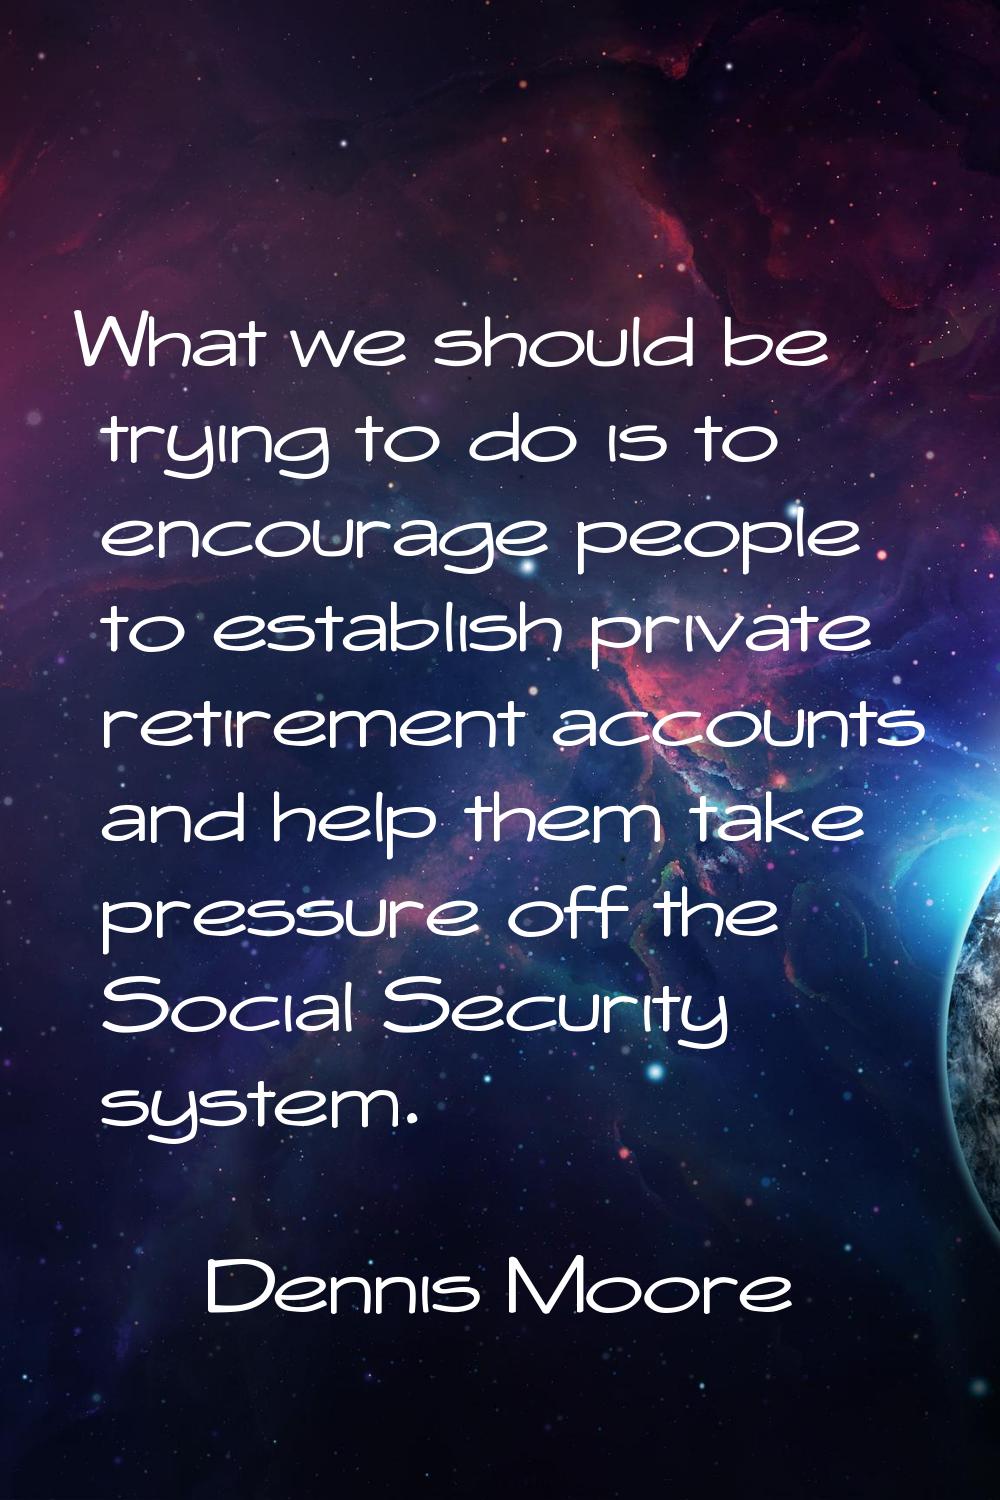 What we should be trying to do is to encourage people to establish private retirement accounts and 